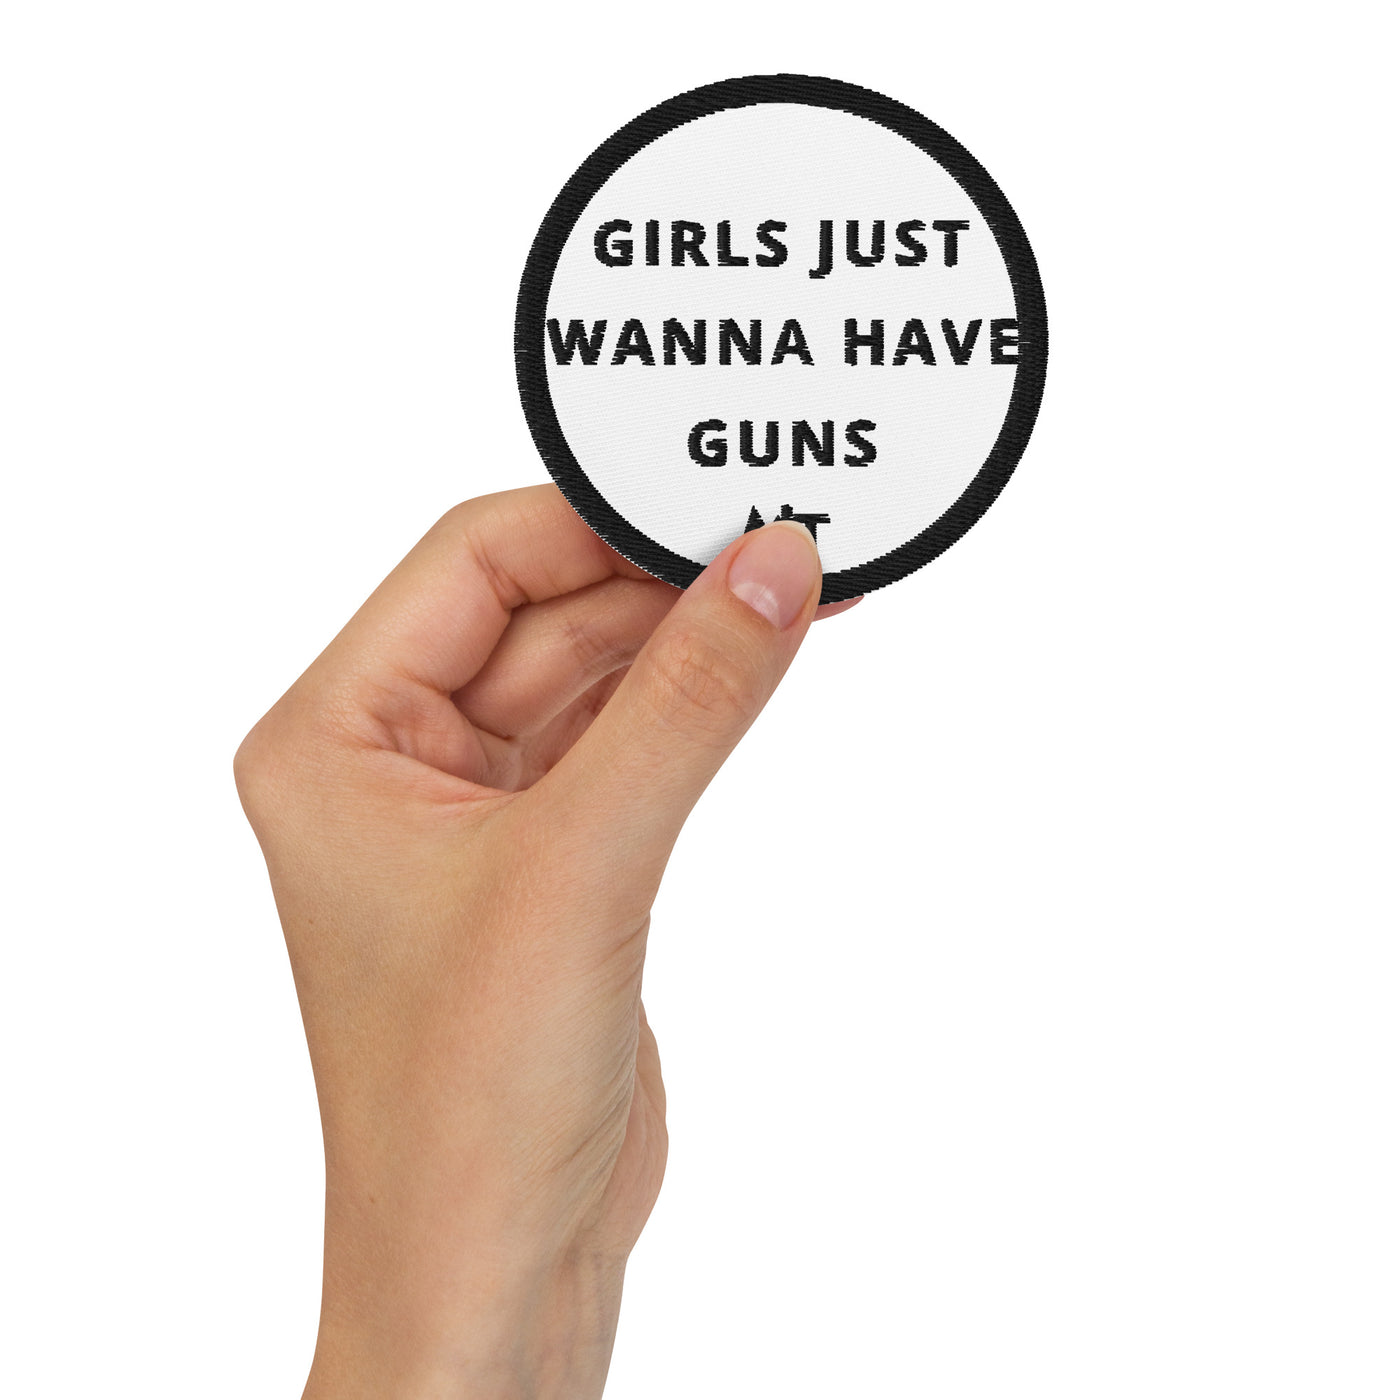 Girls just wanna have guns - Embroidered patches